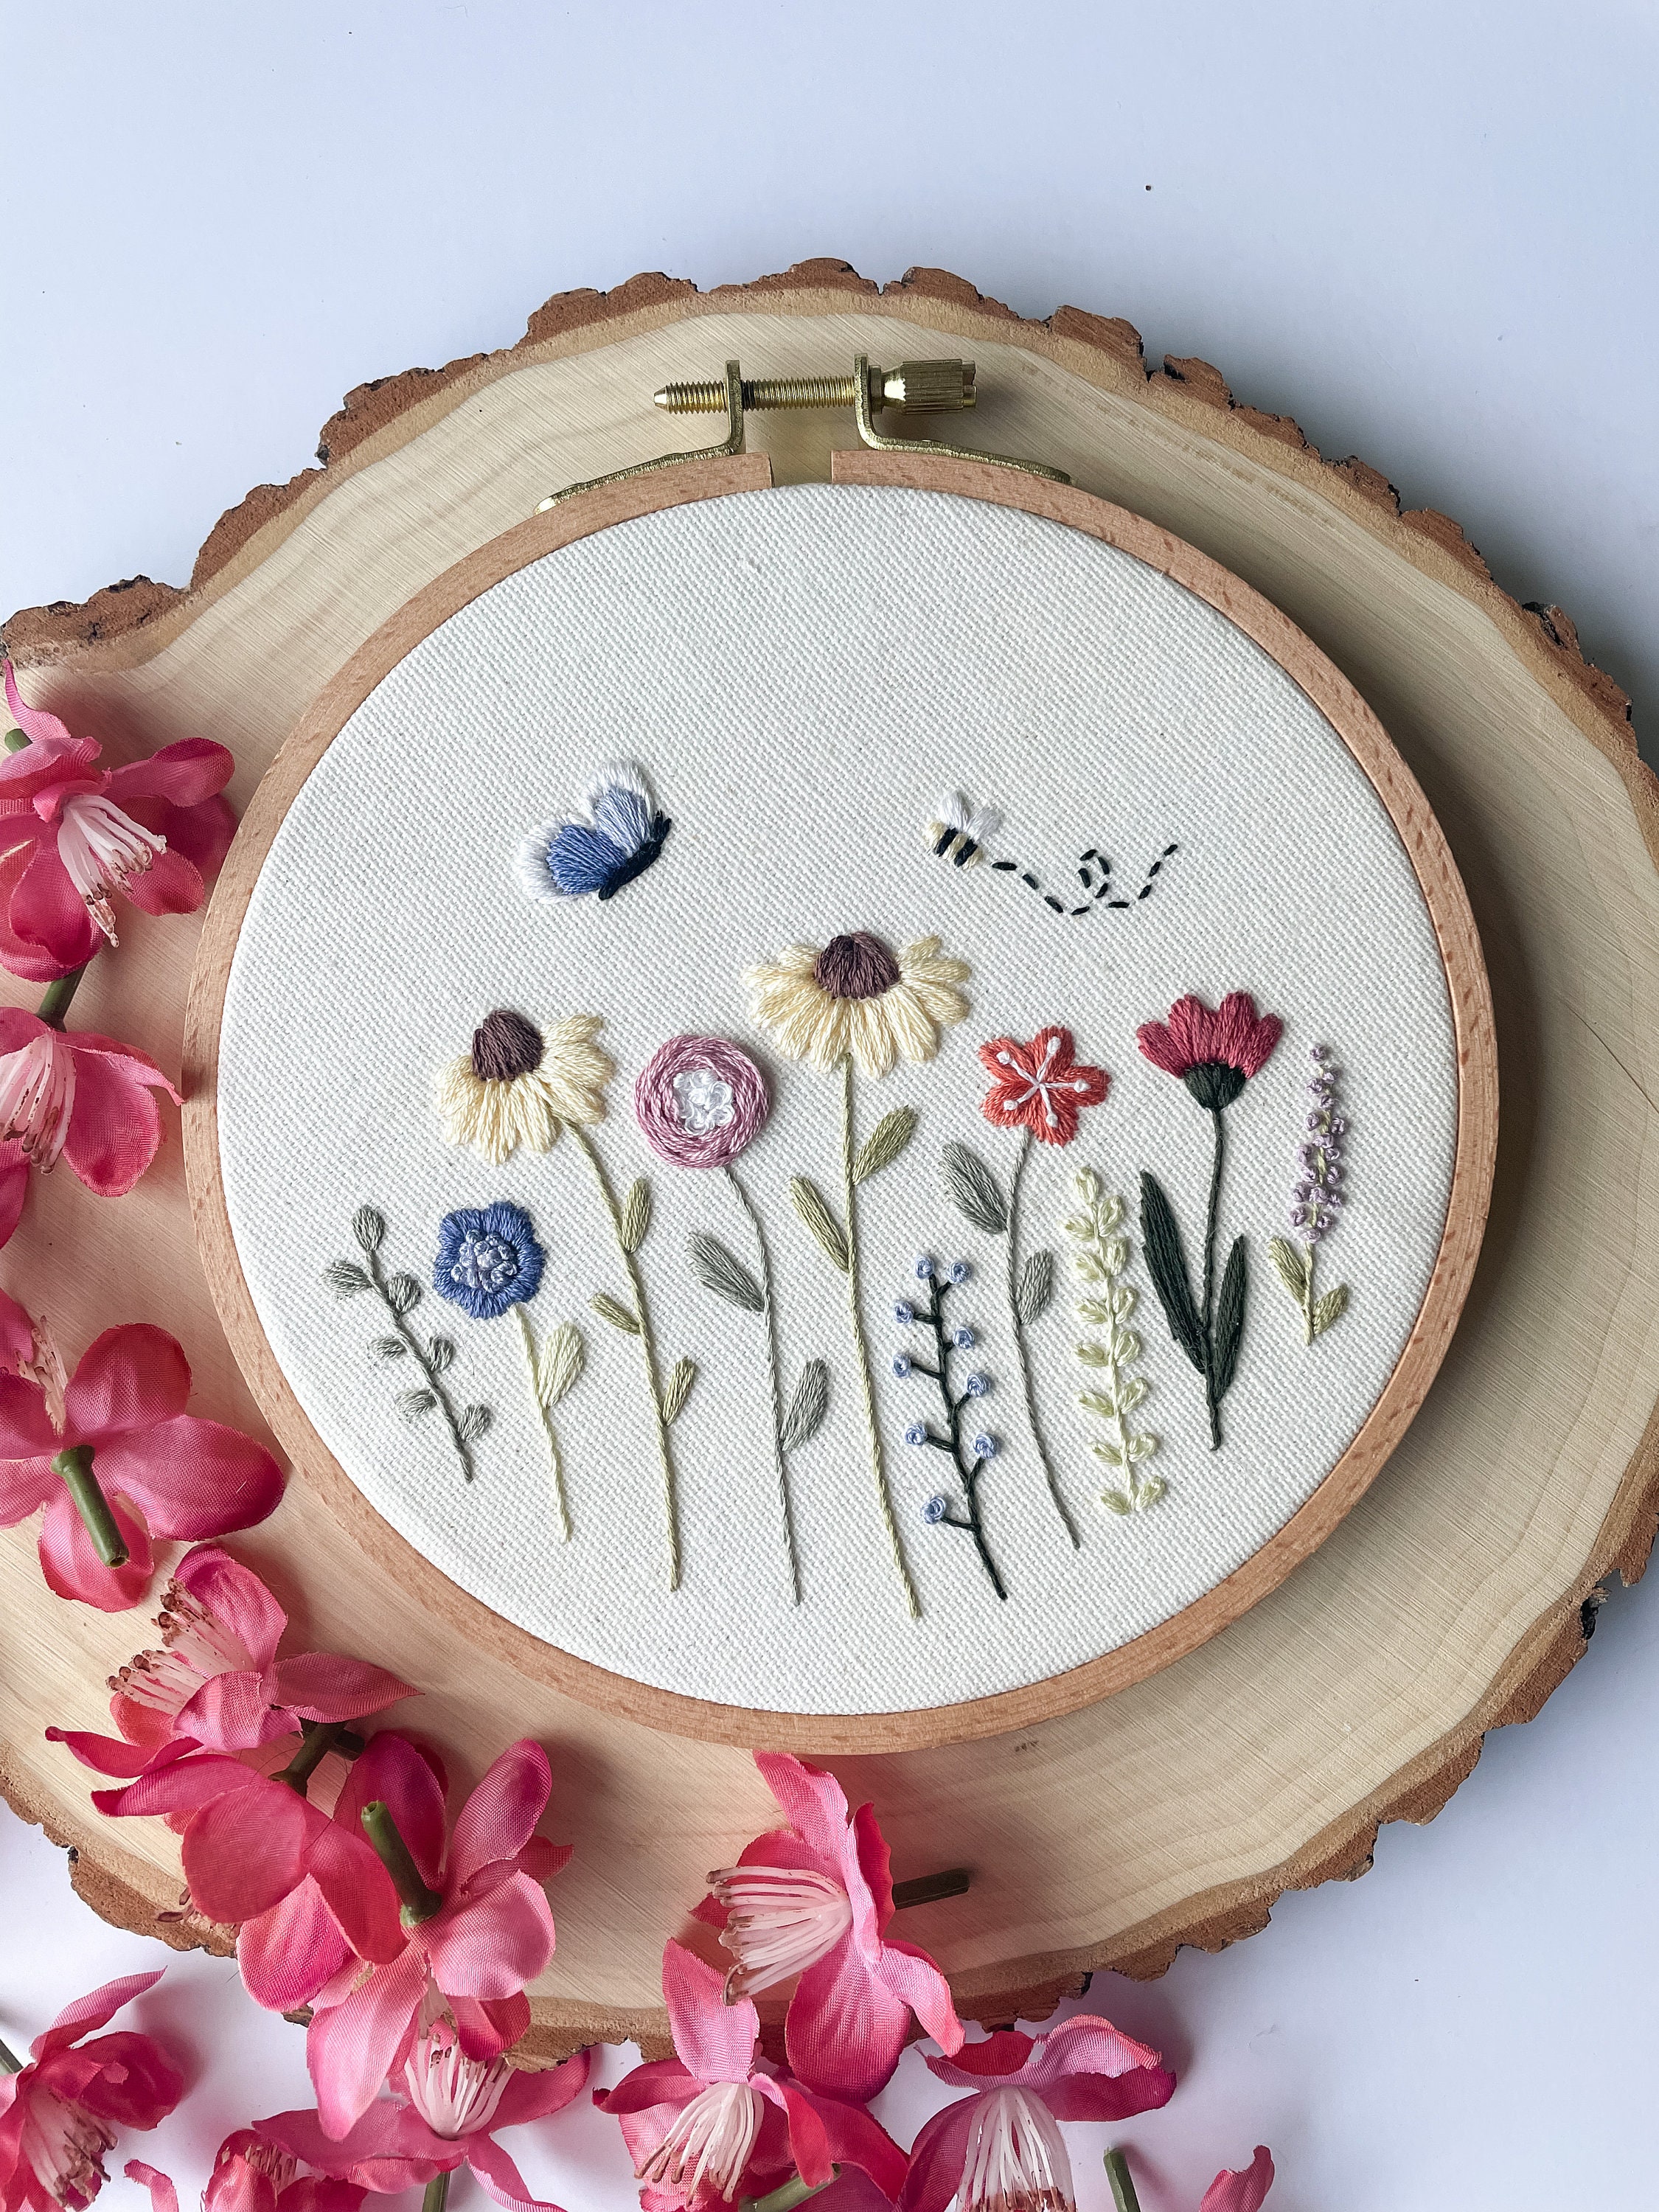 Is anyone else working on an embroidery journal? I've been having a lot of  fun trying to keep up with stitching an icon a day. : r/Embroidery